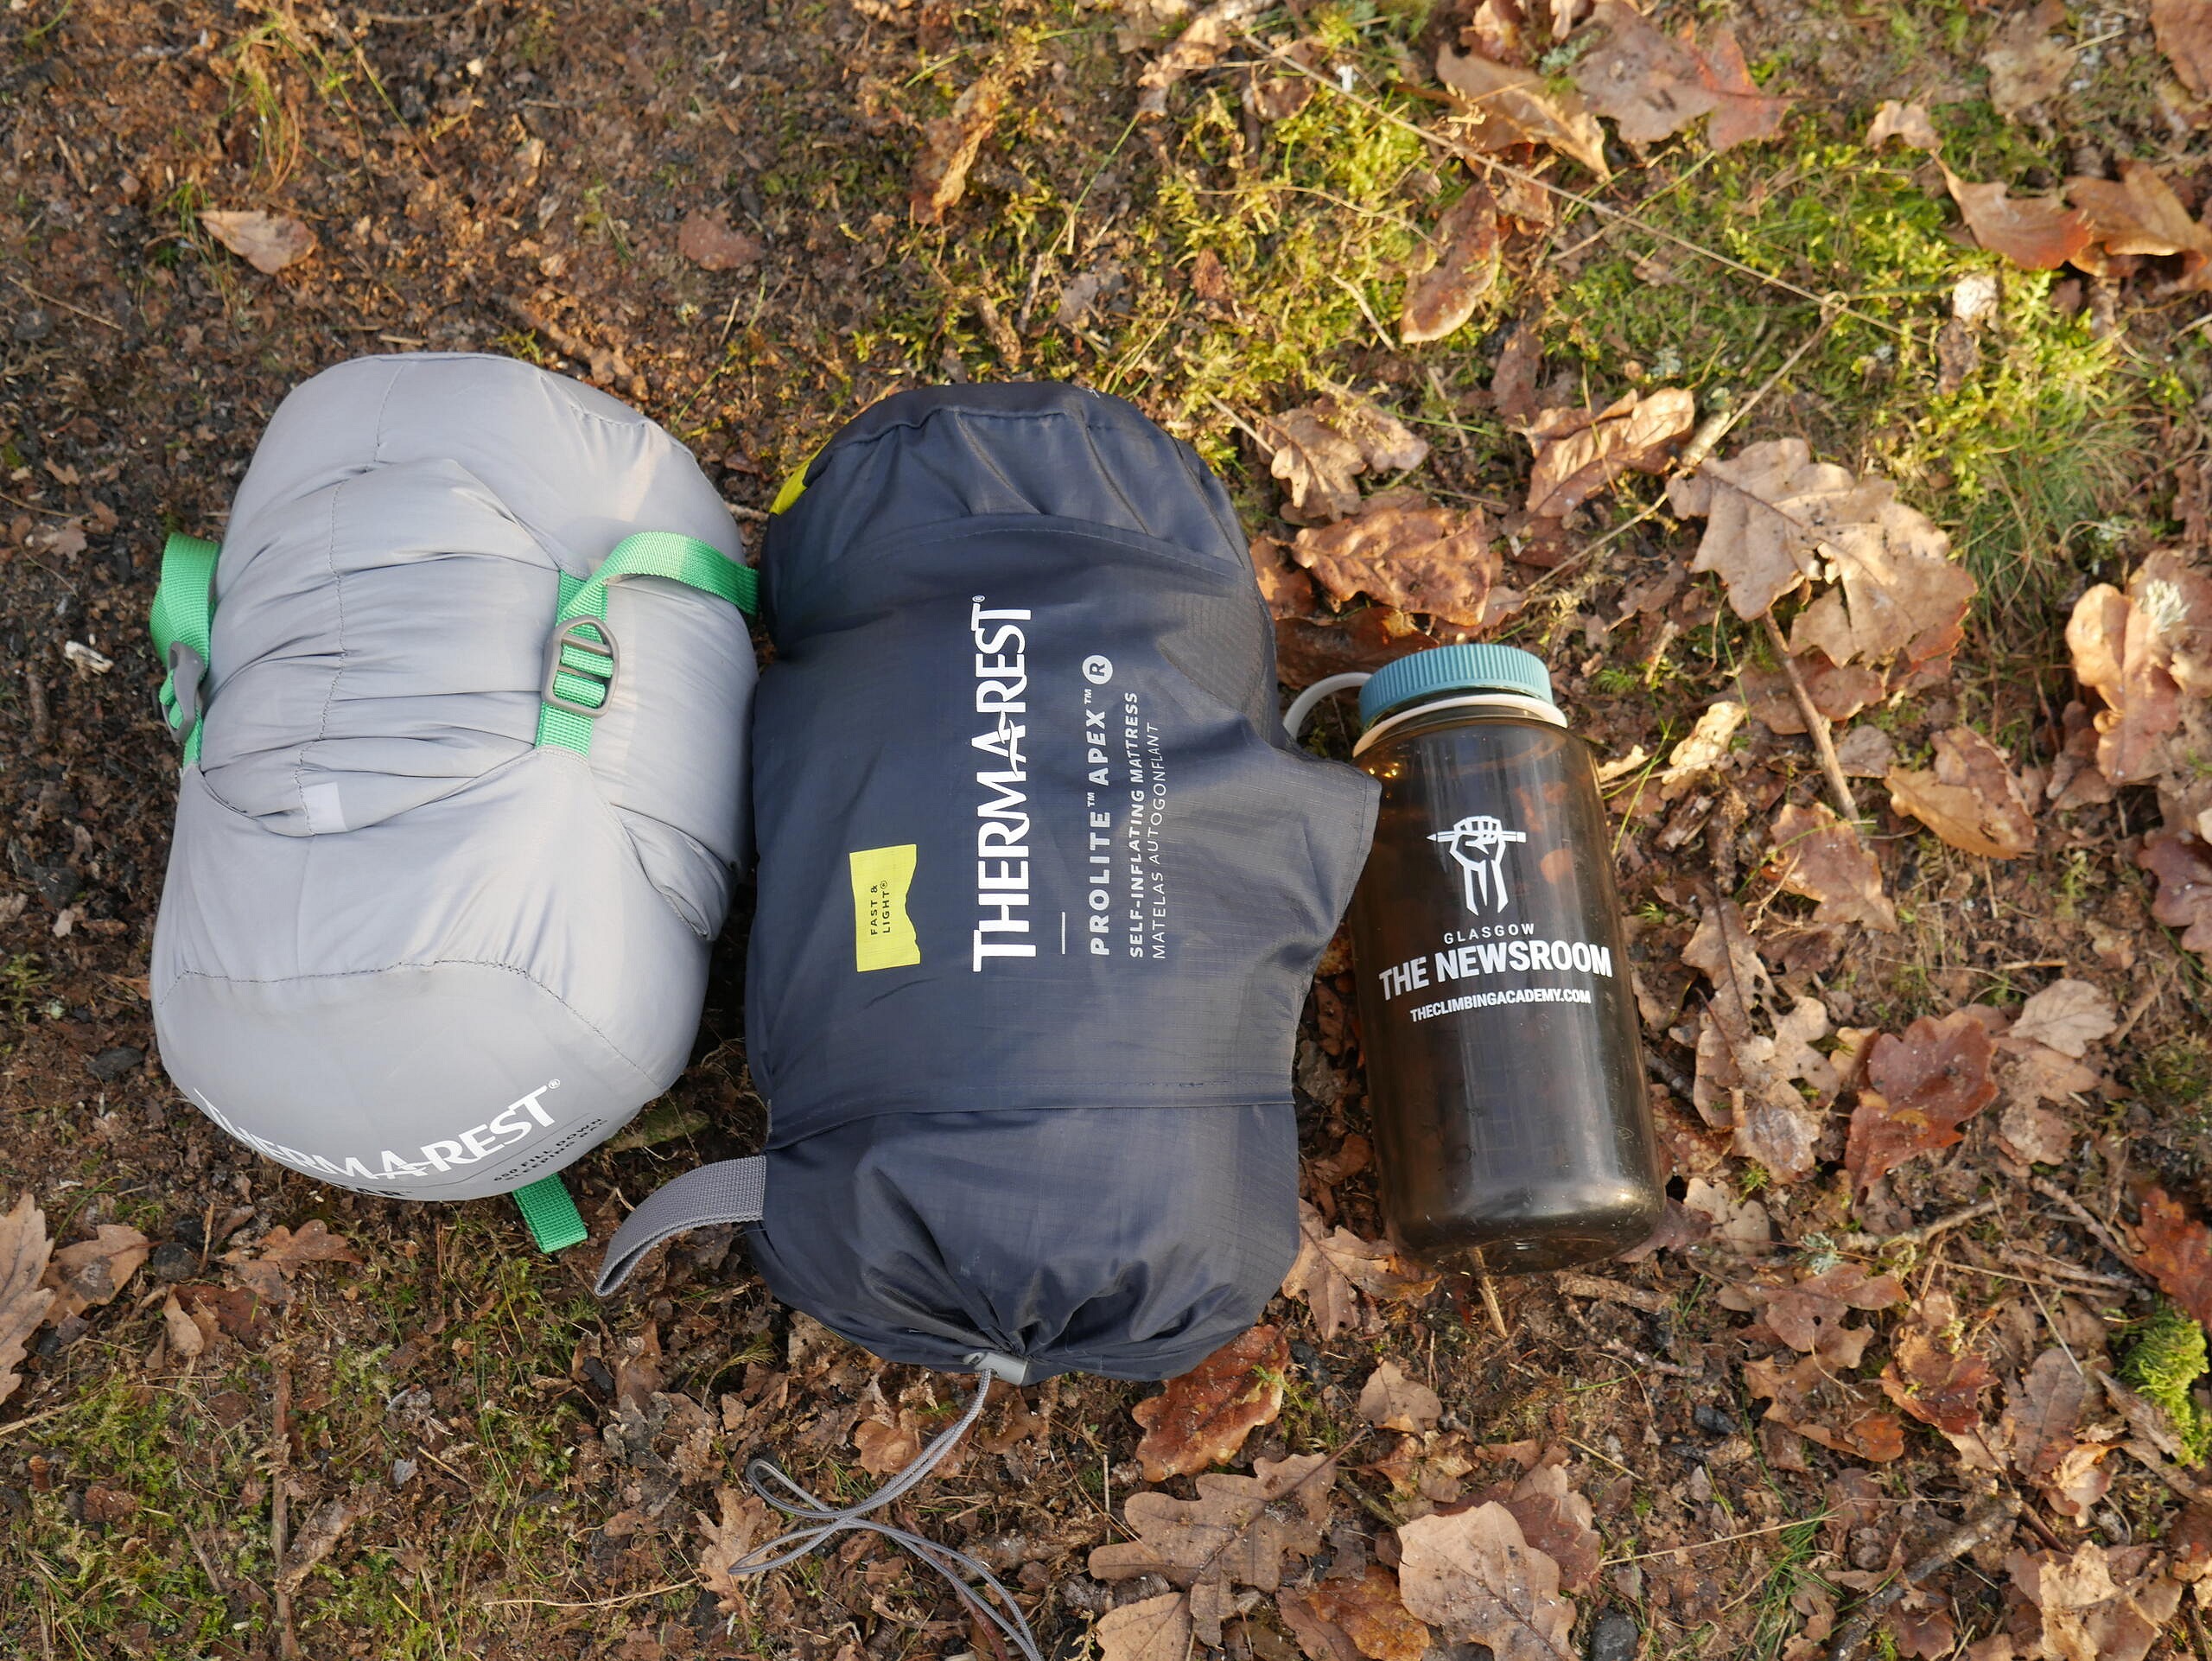 Questar (left) and Prolite (right) packed up with Nalgene for size  © UKC Gear